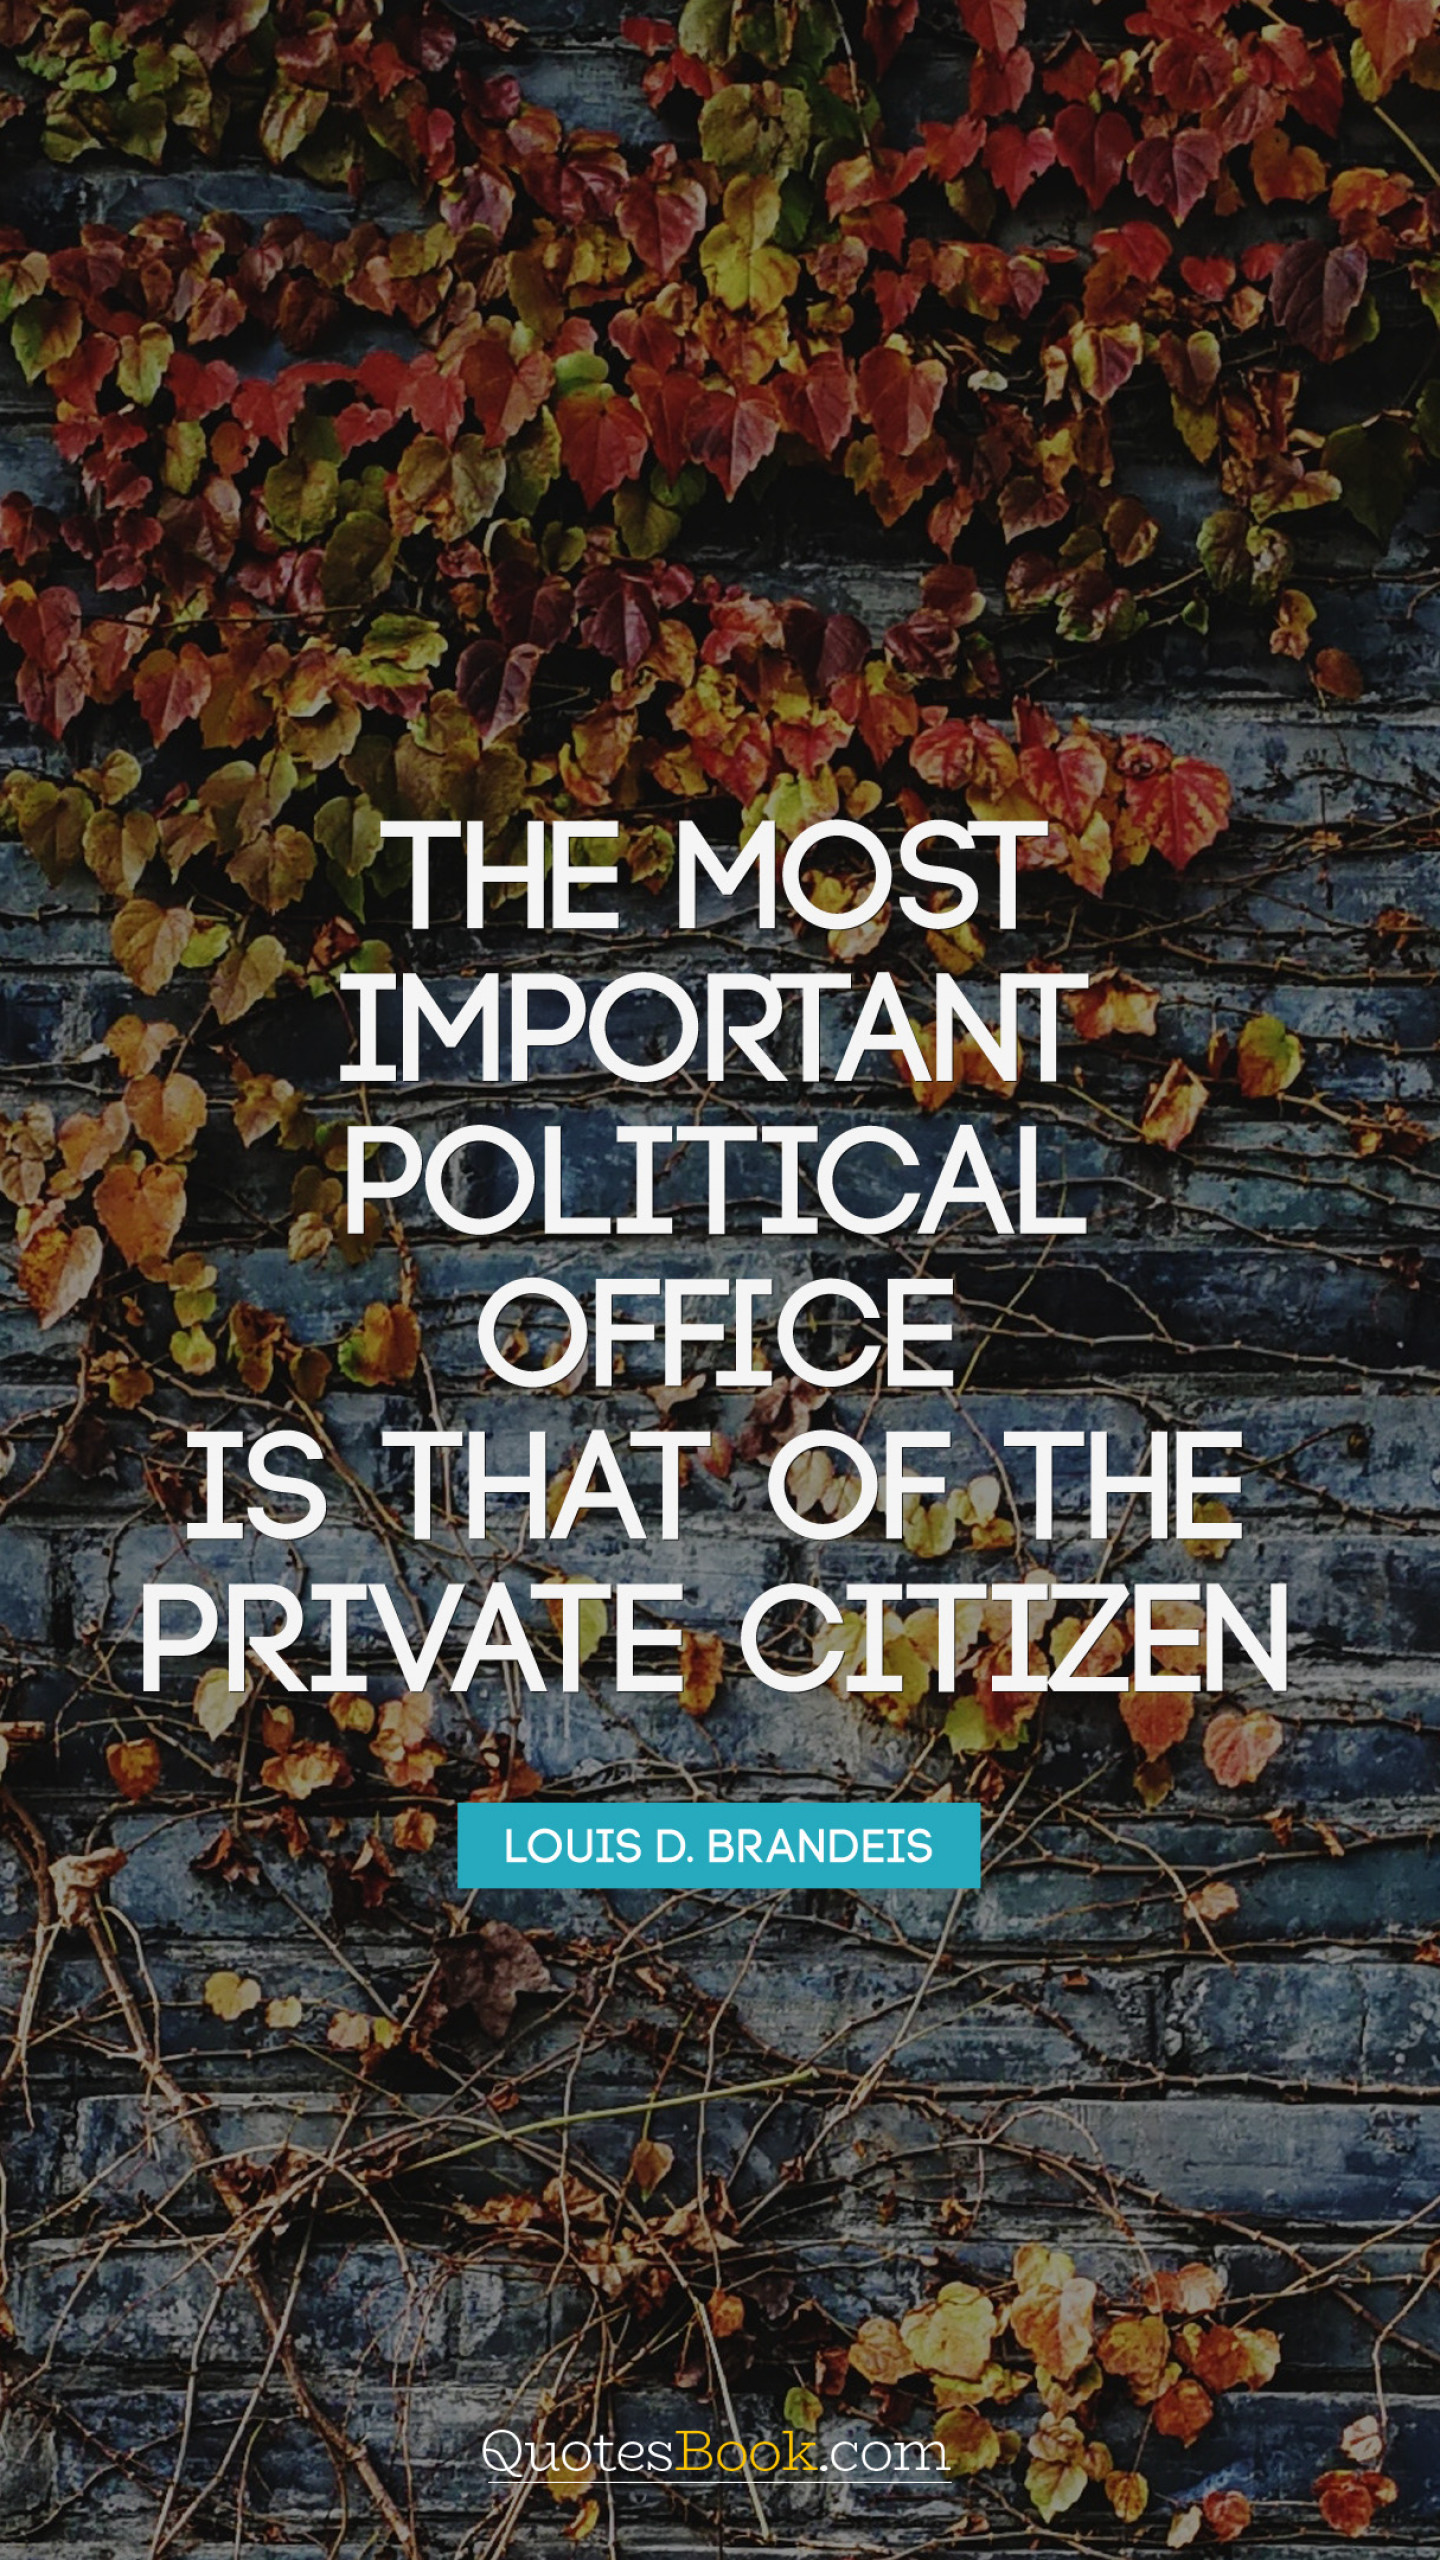 The most important political office is that of the private citizen. - Quote  by Louis D. Brandeis - QuotesBook